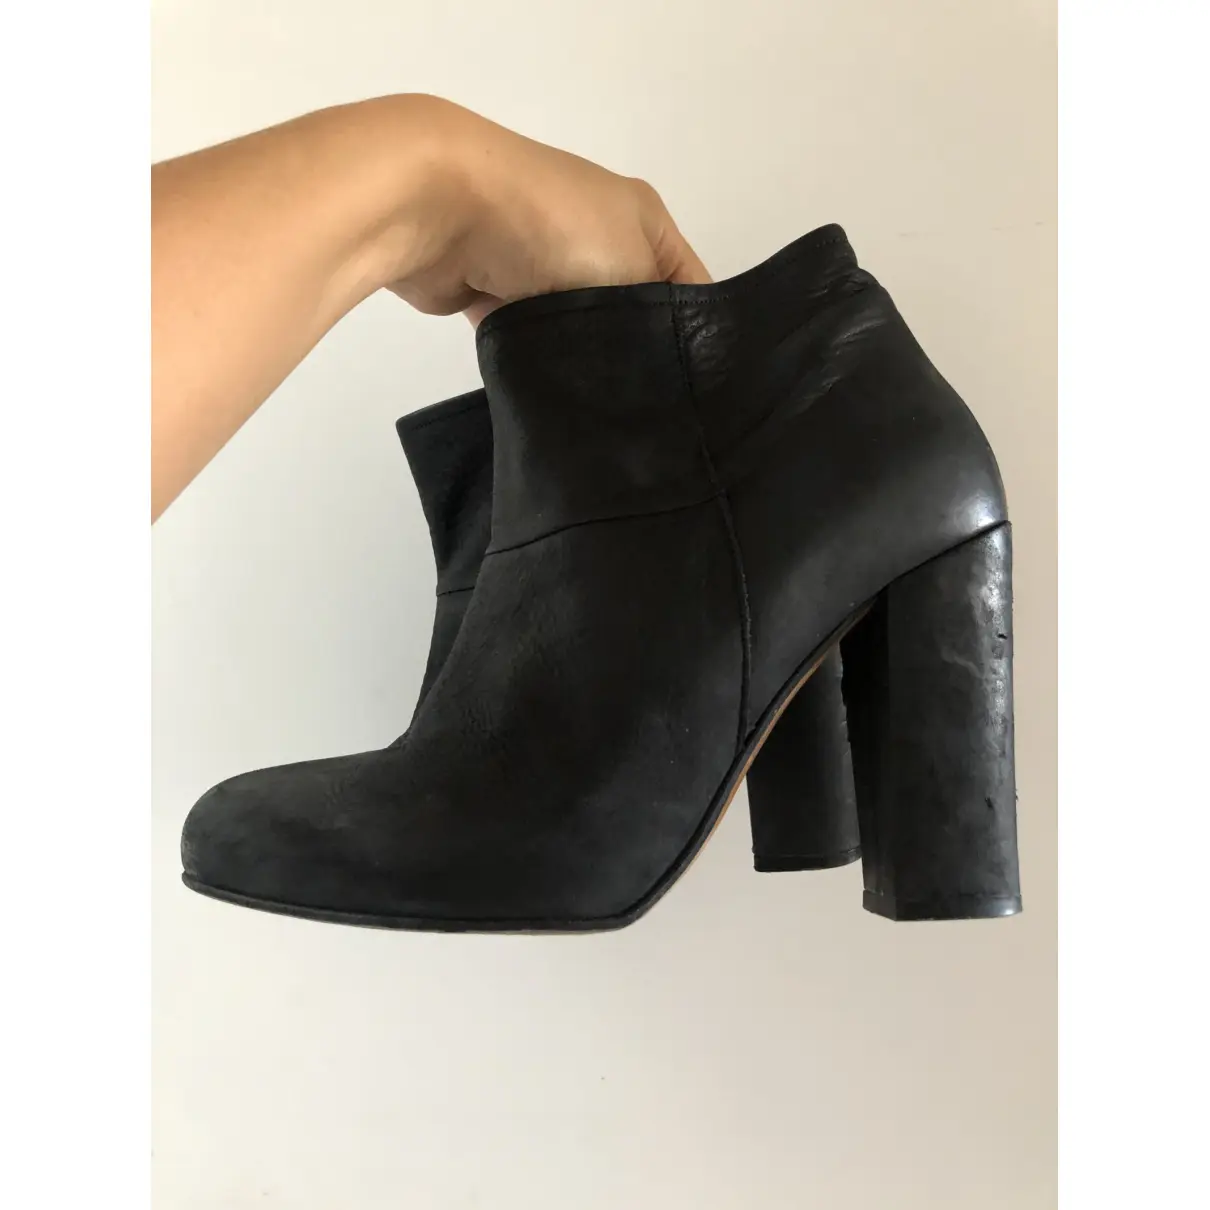 Ankle boots APC